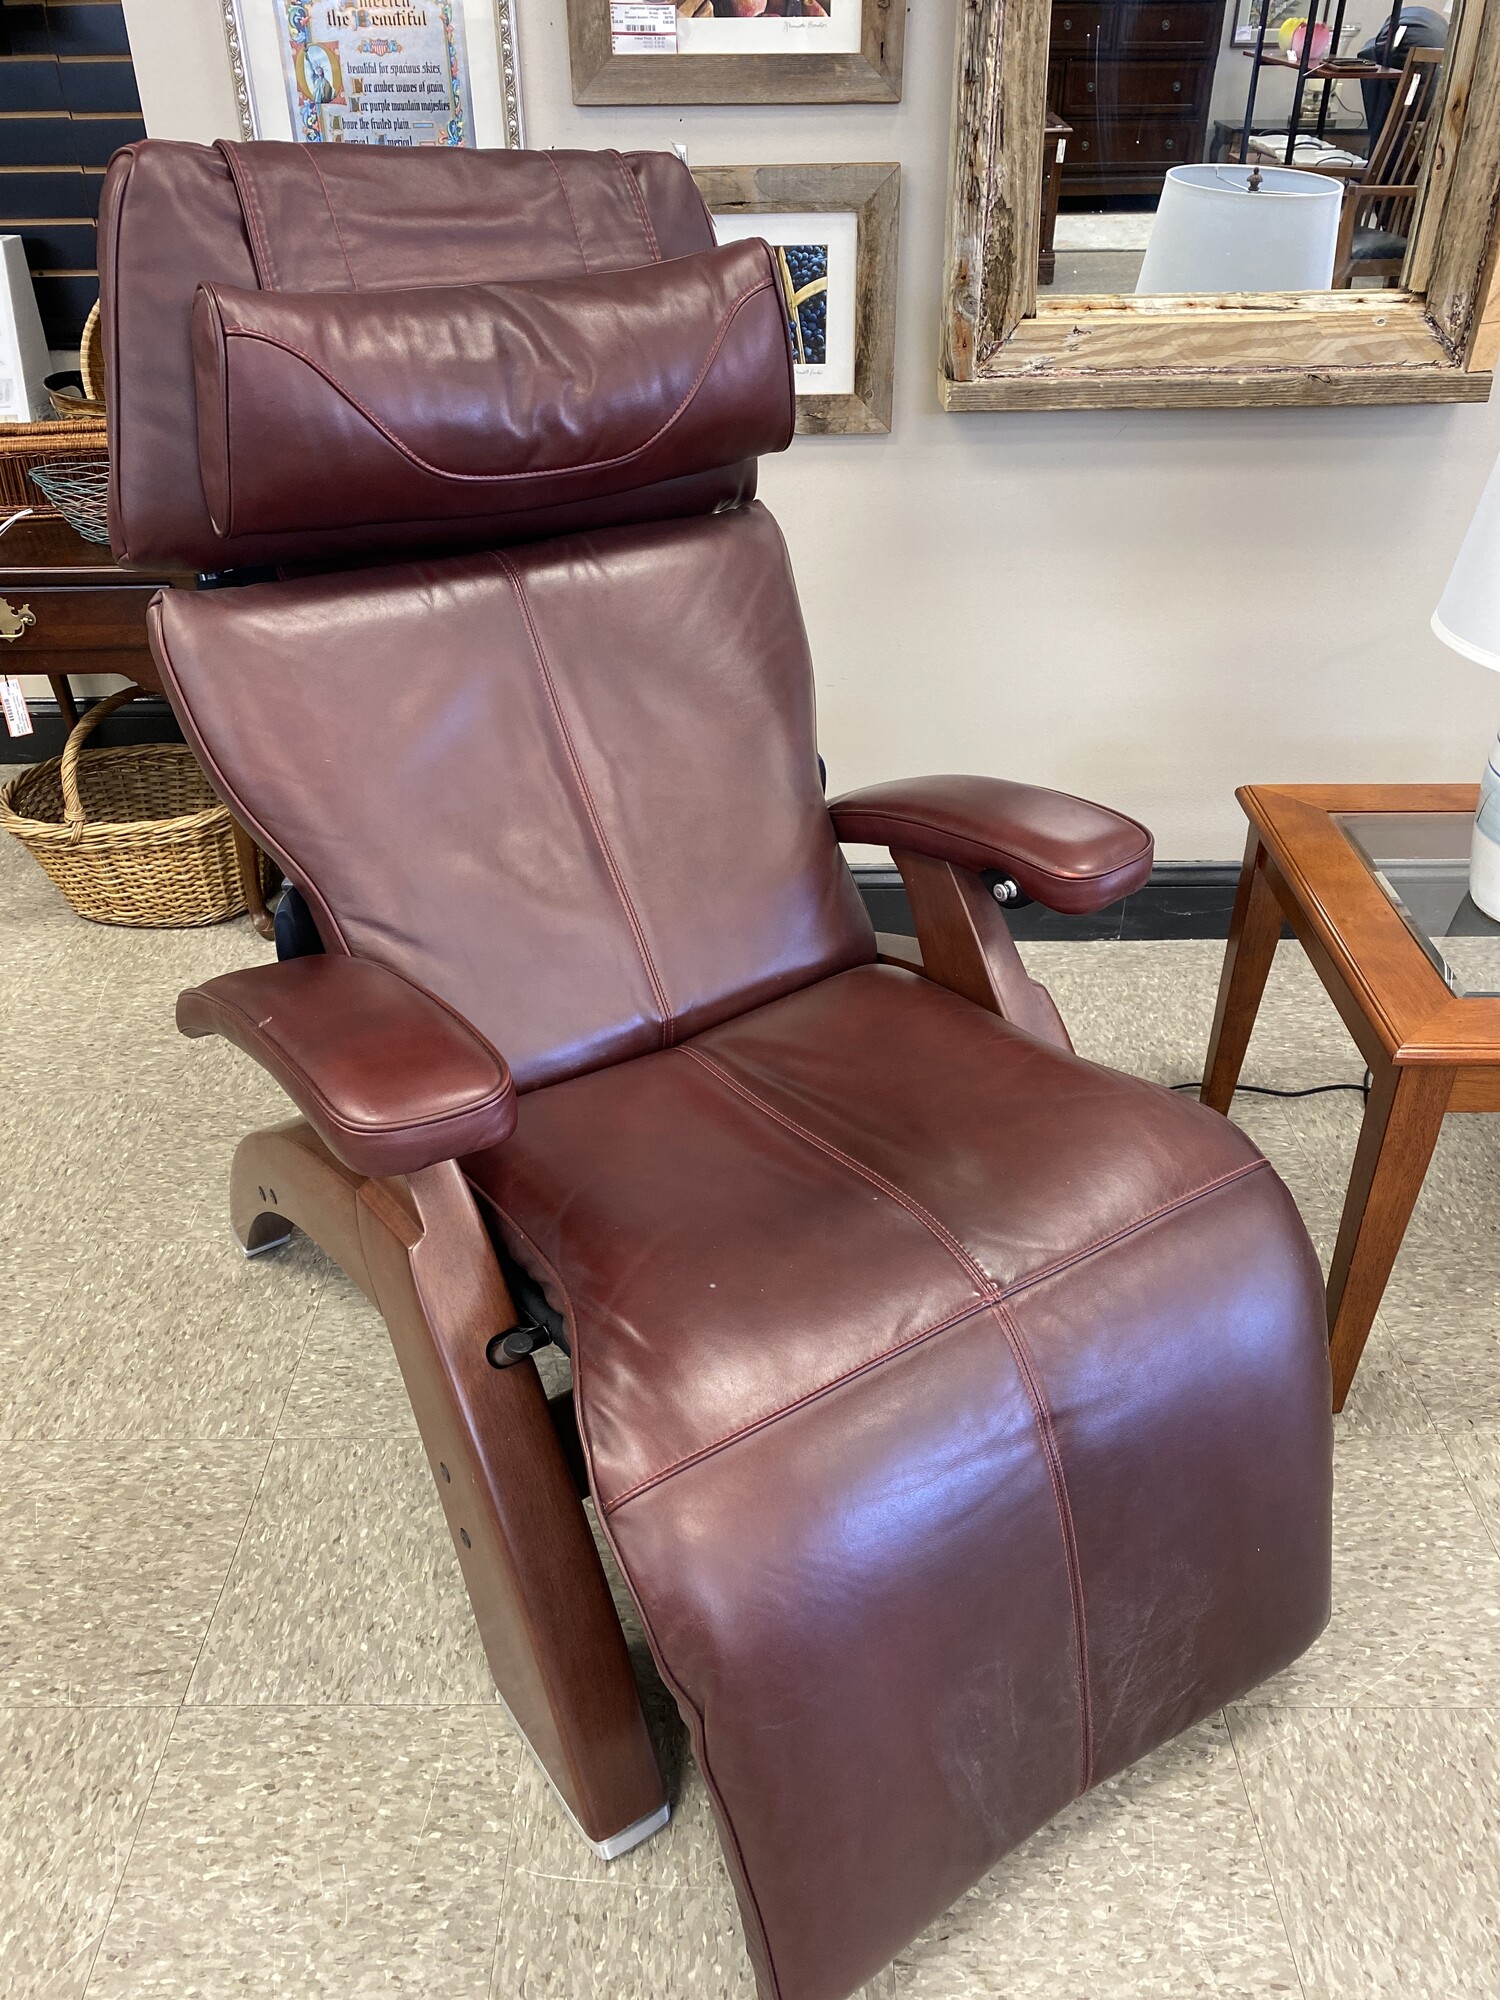 Human Touch Zero Gravity Recliner, Burgundy, Size: 60x30x42 inch
Omni-Motion Electric  Power Classic Perfect Zero Gravity Recliner / Chair - The Silhouette is a slightly smaller Perfect Chair with a slightly more compact footprint & features the same independent leg control for improved style & comfort. Now you can control the recline angle & leg elevation positions separately.
The 5-Way Controller gives you maximum control of your Perfect Chair experience.
New longer armrests support your arms even in the reclined position.
The zero gravity position cradles your back and elevates your legs above your heart, which is the position that doctors recommend as the healthiest way to sit.
Easy ingress and egress are achieved with the extended range of motion in the upright position.
Exclusive Features Patented Orthonomic body frame with built-in lumbar curve.
Extra wide legrest provides maximum comfort.
Hand carved & finished base is pleasing to the eye, and constructed for years of use. .
Brake control system is easy to use & extremely reliable.
Adjustable headrest feature allows you to customize the optimum angle of comfort to maximize neck support while reading or watching television.
Exclusive guide rail system for smooth recline motion & position control.
Add standard 9V Batteries for an Emergency Back-Up System.
Upright Dims 43L X 30W X 47H, Reclined Dims 63L X 30W
Reclined Headrest Height 26, Reclined Footrest Height 31, Seat Width 22
Gross weight (chair in box) 90 lbs, Maximum Load Weight 400 lbs
Required Recline Clearance is 9, Recline Angle 125-175 Degrees
Human Touch 5-Year Factory Warranty - 3 Years In-Home Parts and Labor with 5 Years Parts
Shipping Box Dimensions 42L X 30W X 27H